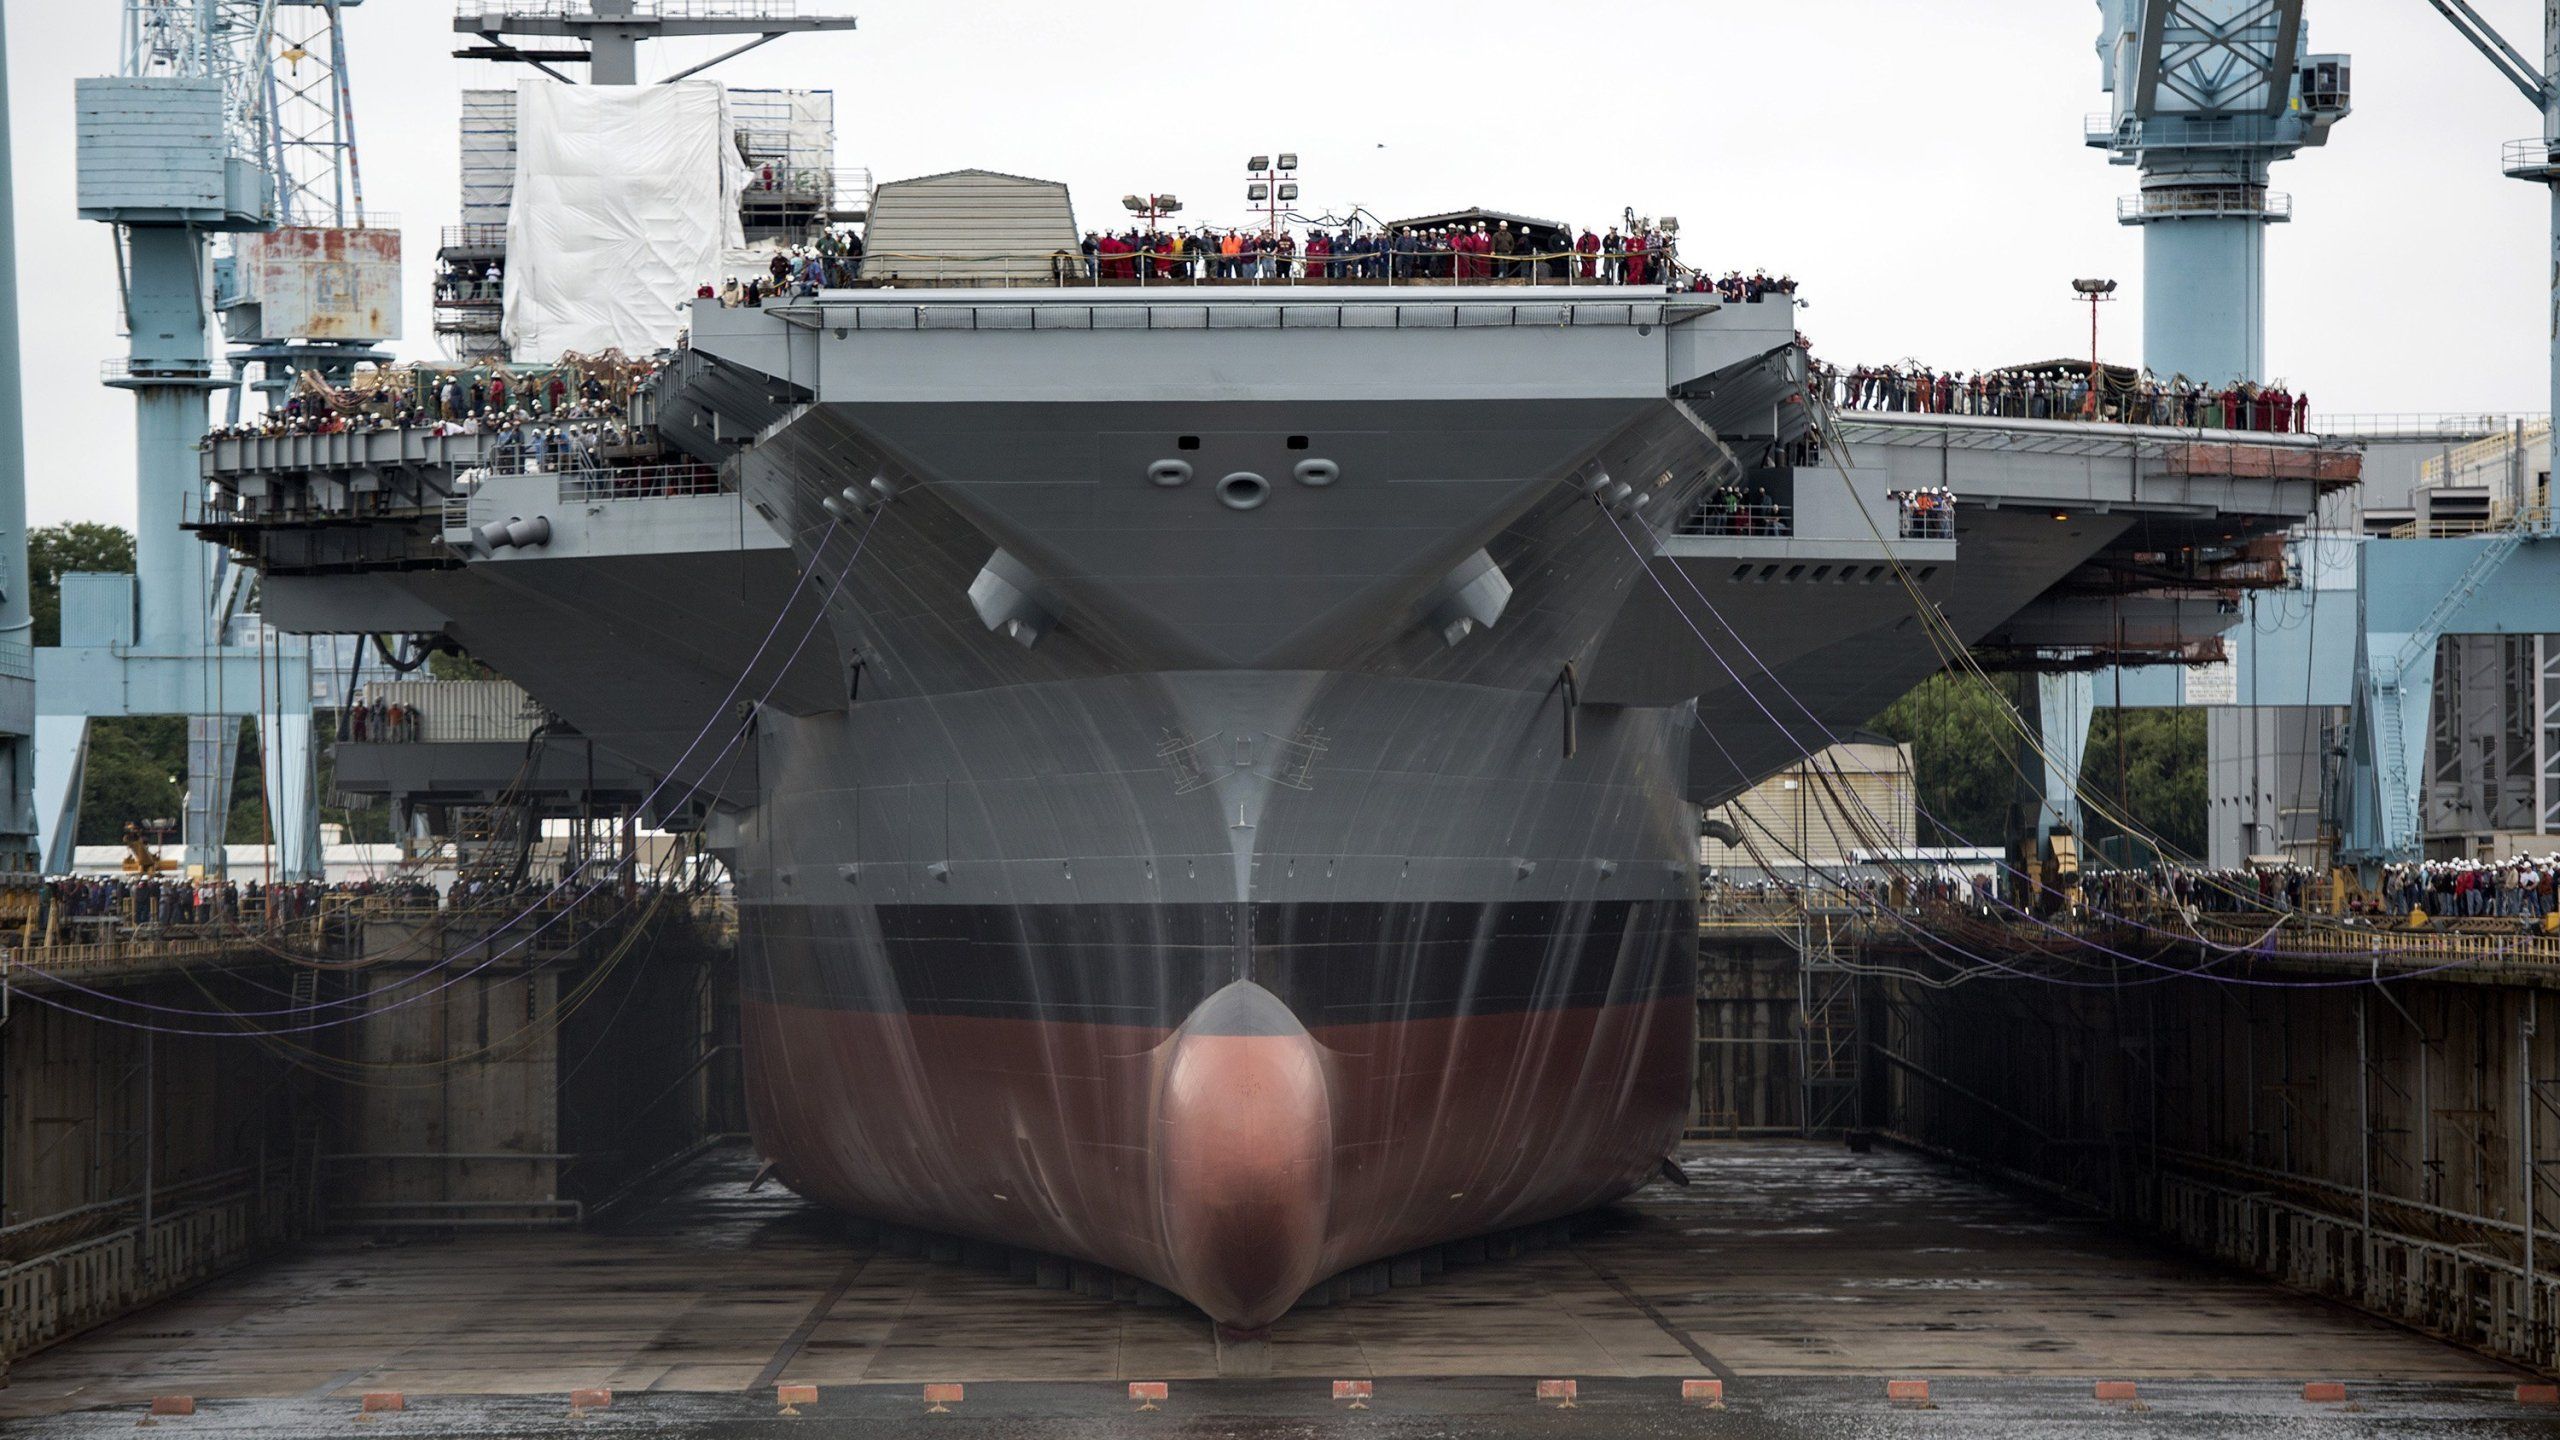 U.S. Navy's new $13B aircraft carrier can't fight